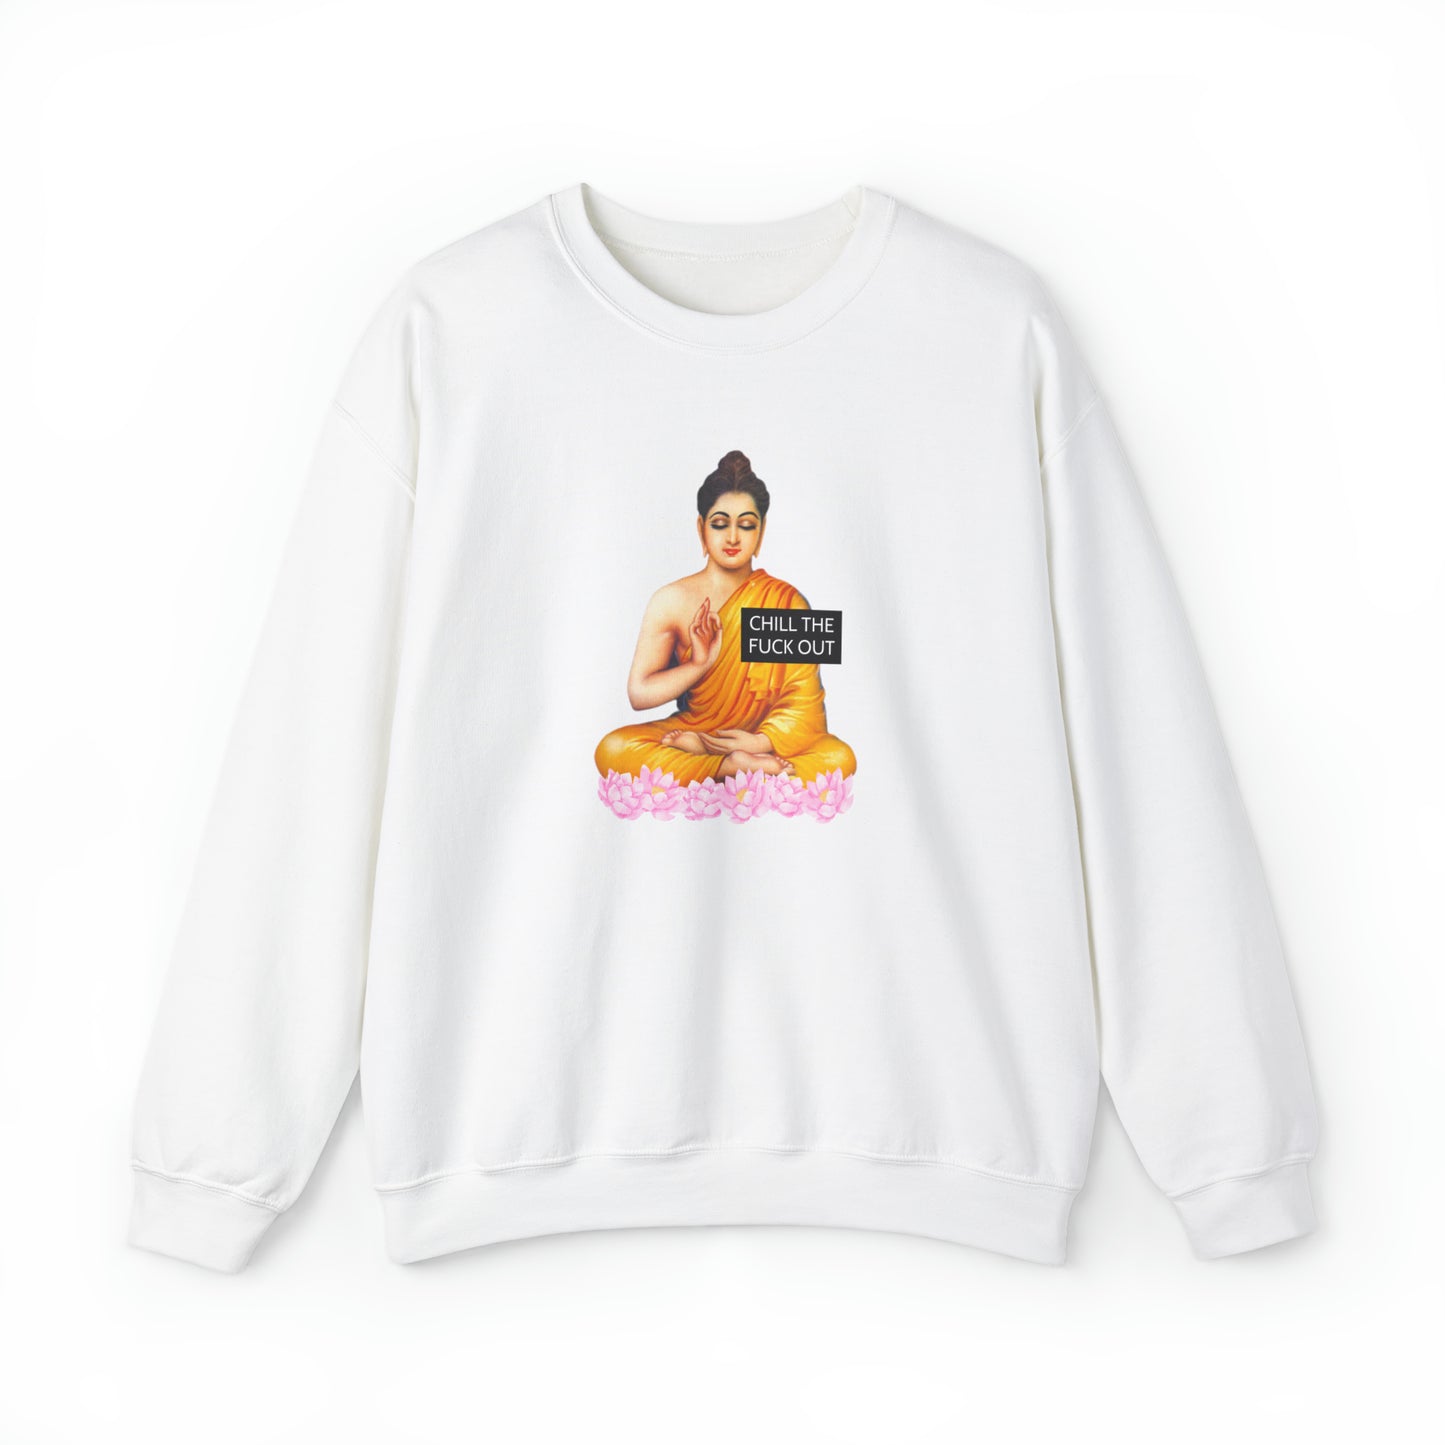 Chill The Fuck Out Sweatshirt, Chill The Fuck Out Crewneck